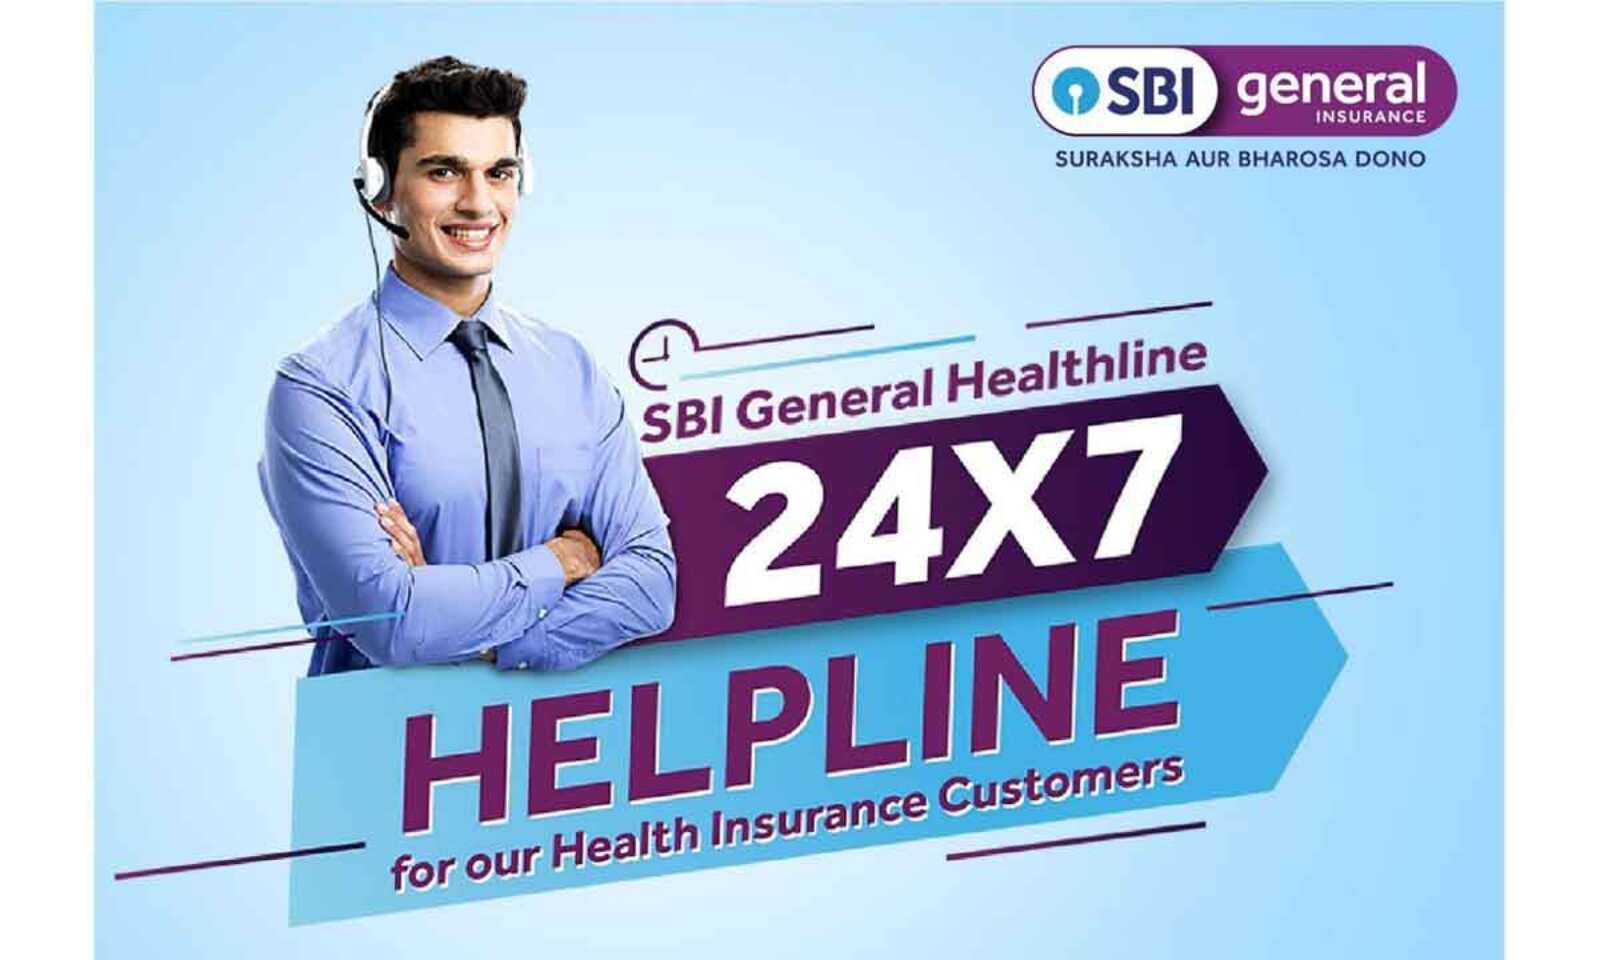 Life Insurance Policy | SBI Life Insurance Company in India